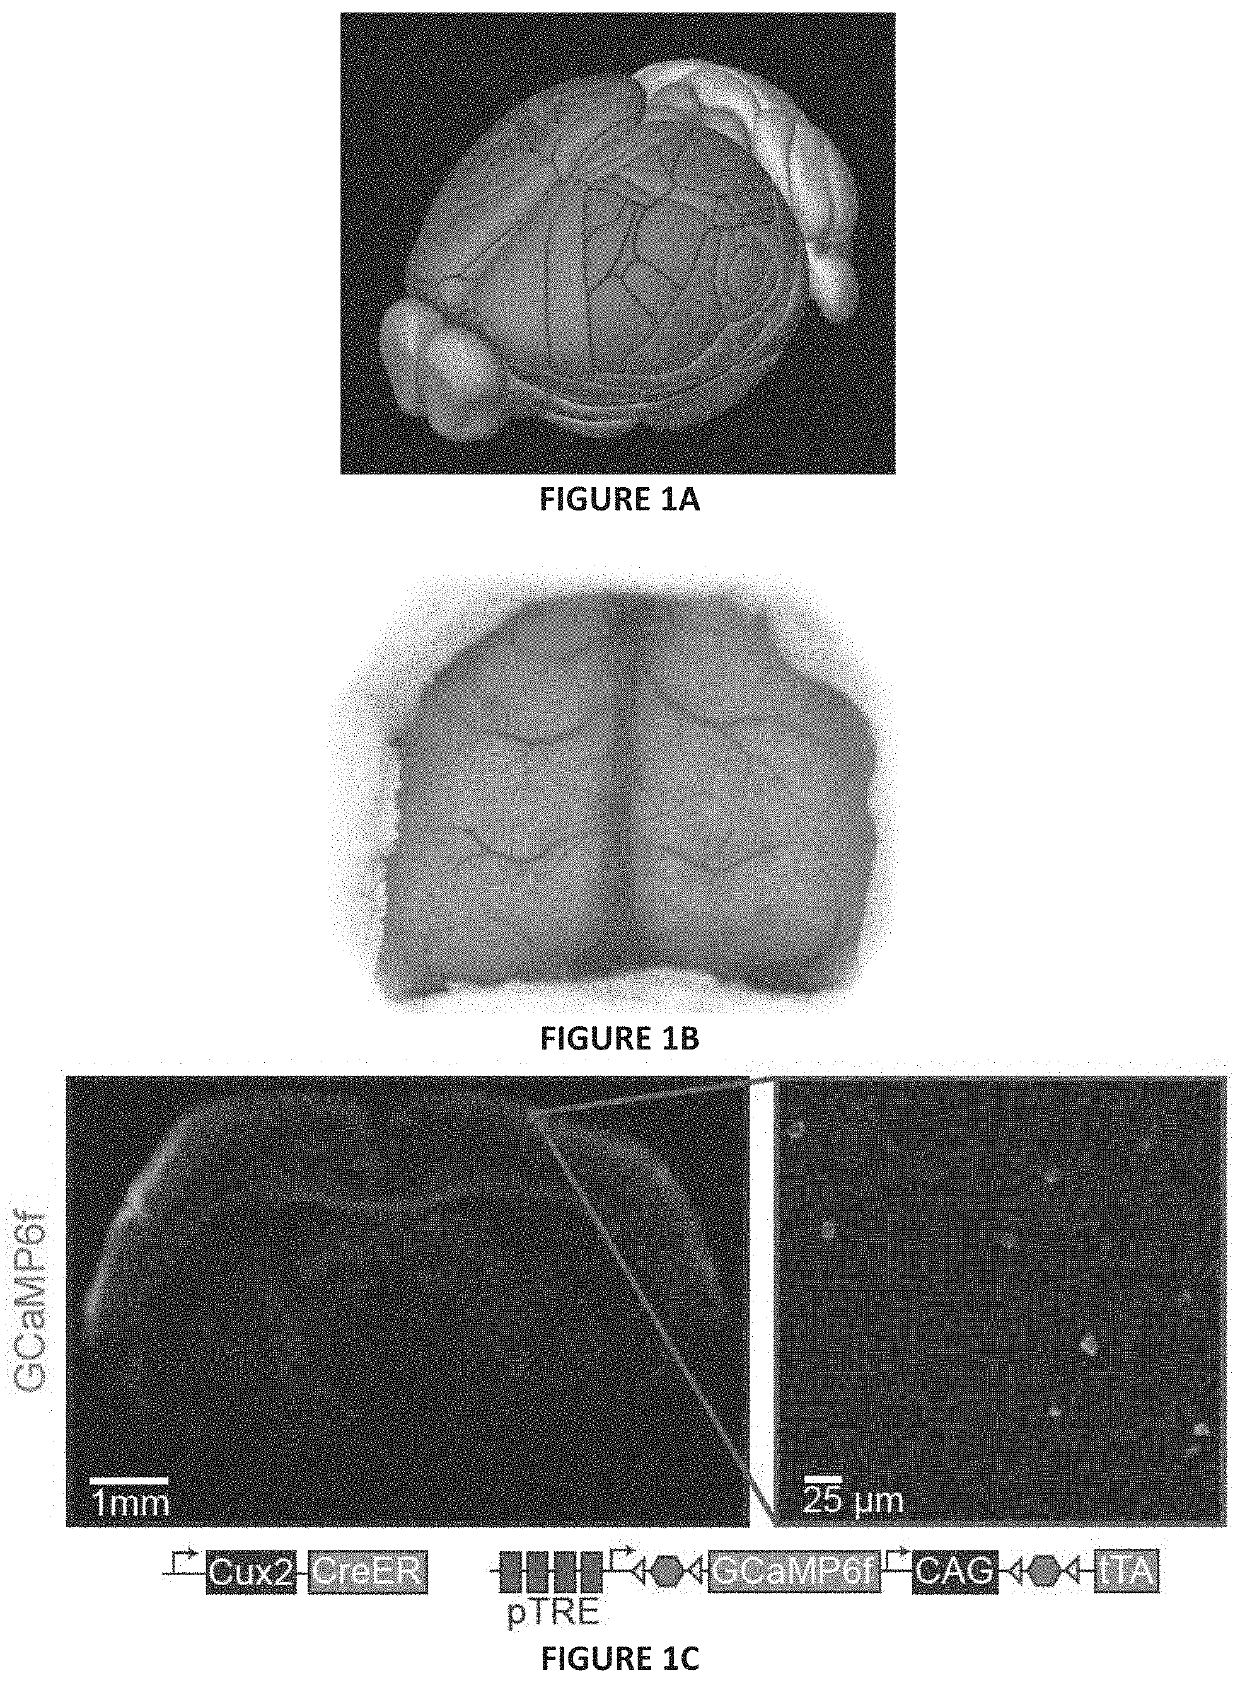 Multifocal macroscope for large field of view imaging of dynamic specimens